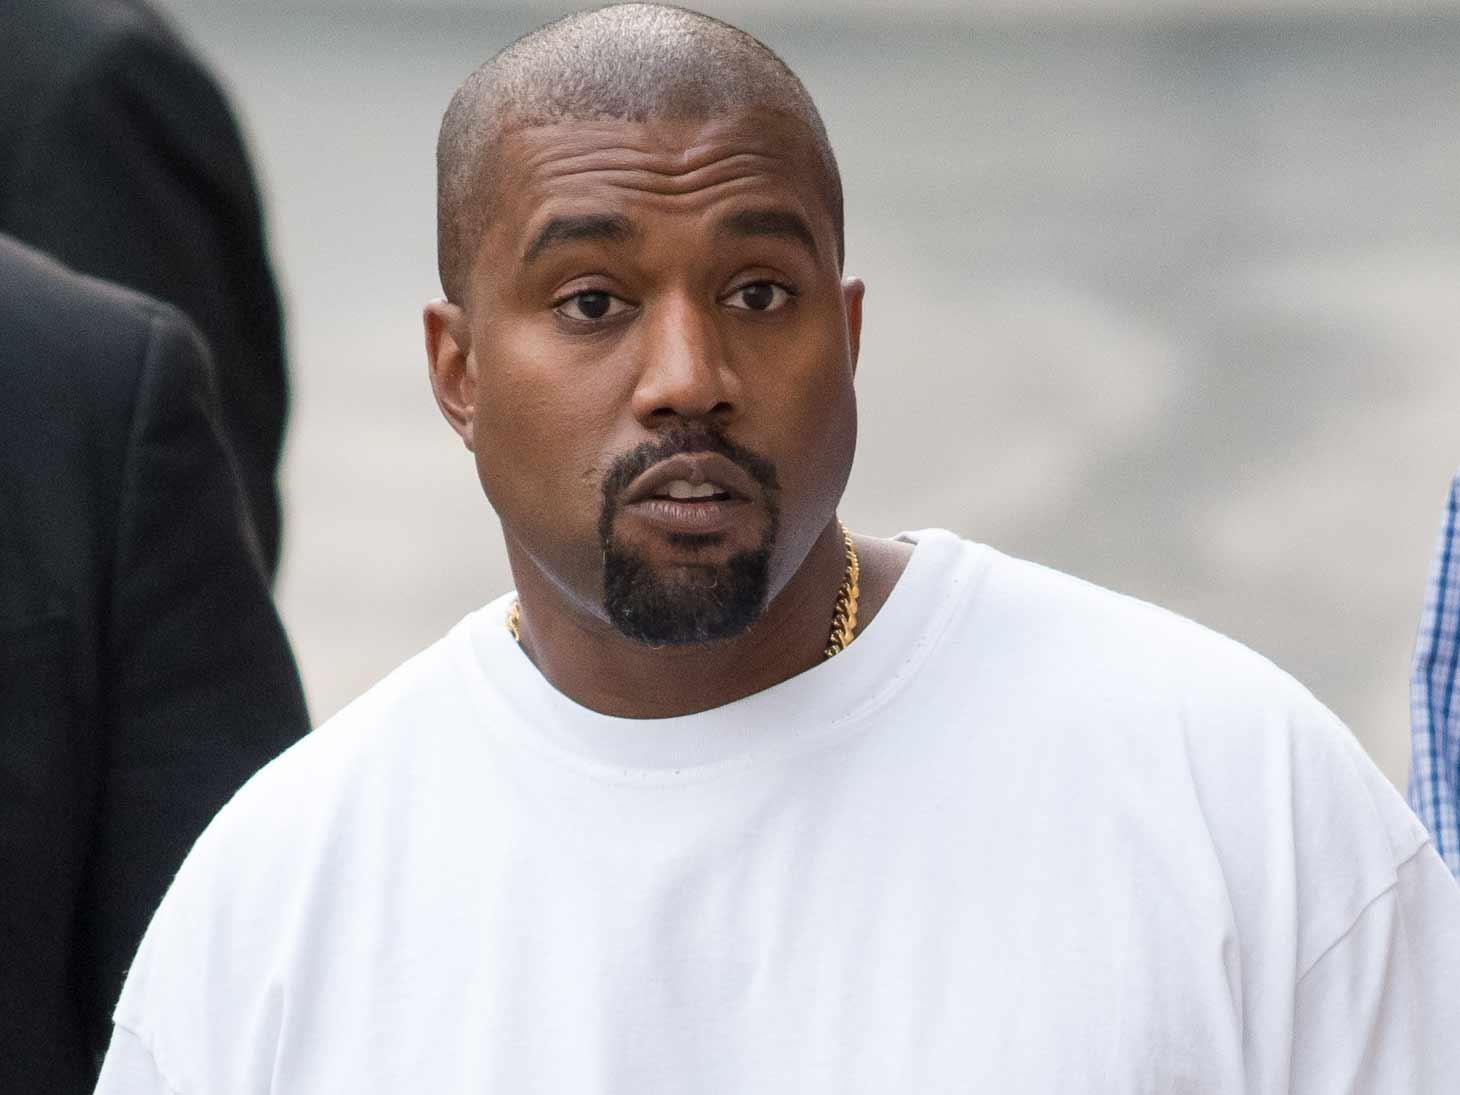 Kanye West Sues Roc-a-Fella Records and Def Jam, Claims He Helped ‘Revitalize’ Jay-Z’s Career